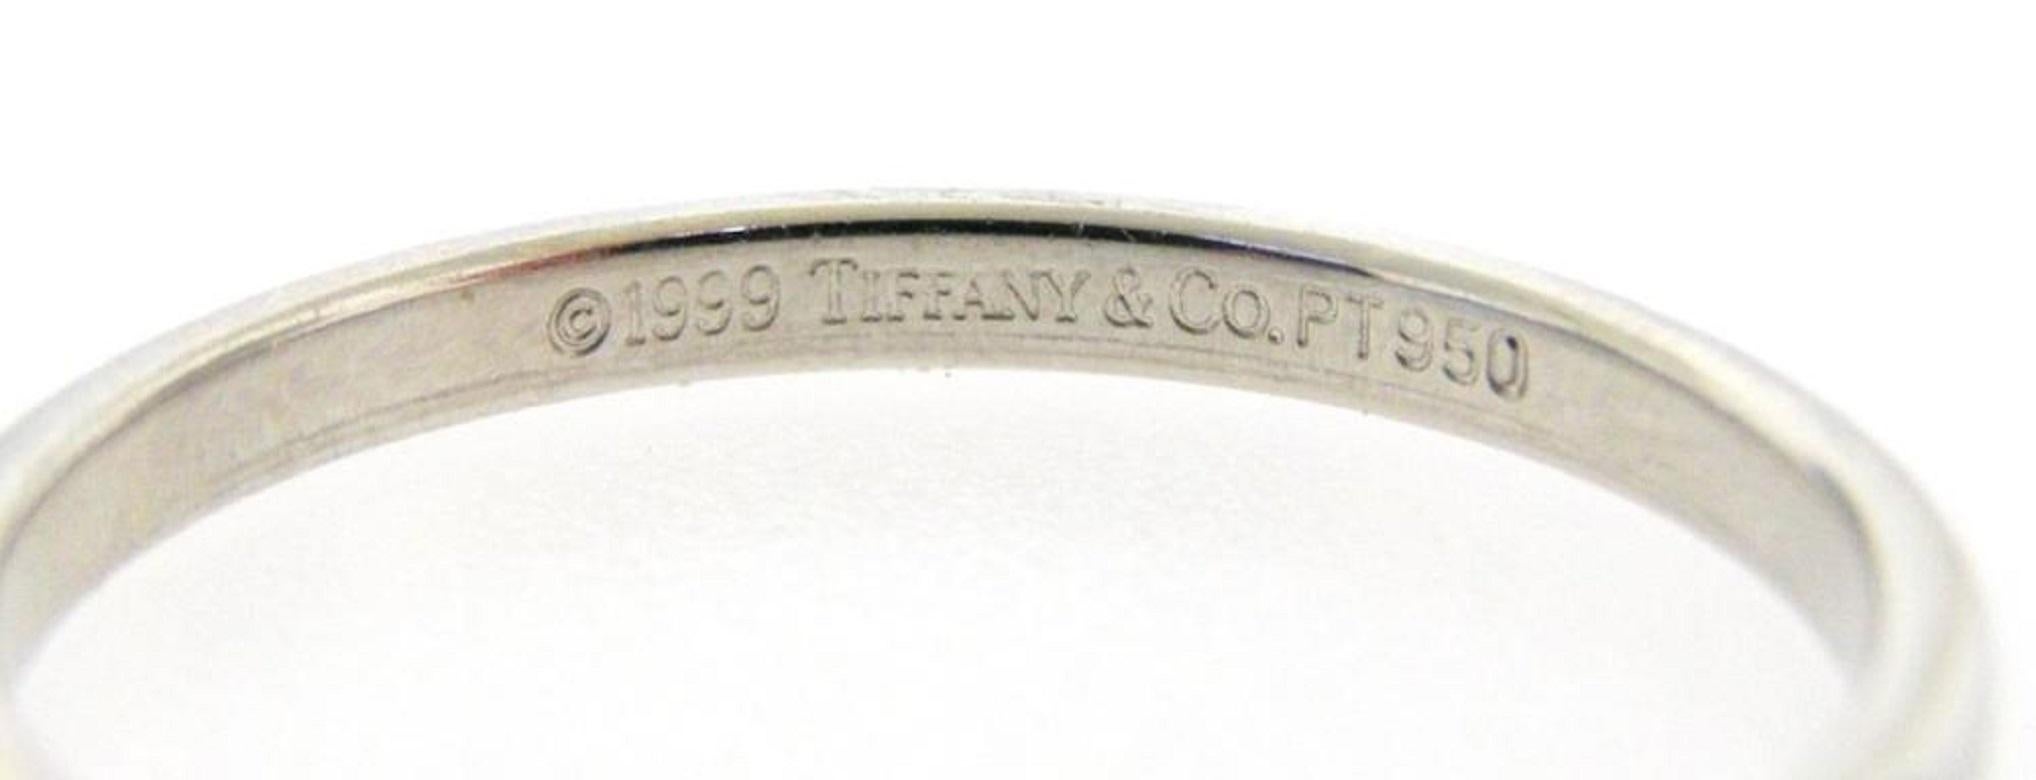 Tiffany & Co Platinum Lucida Wedding Band Ring In Excellent Condition For Sale In Dania Beach, FL